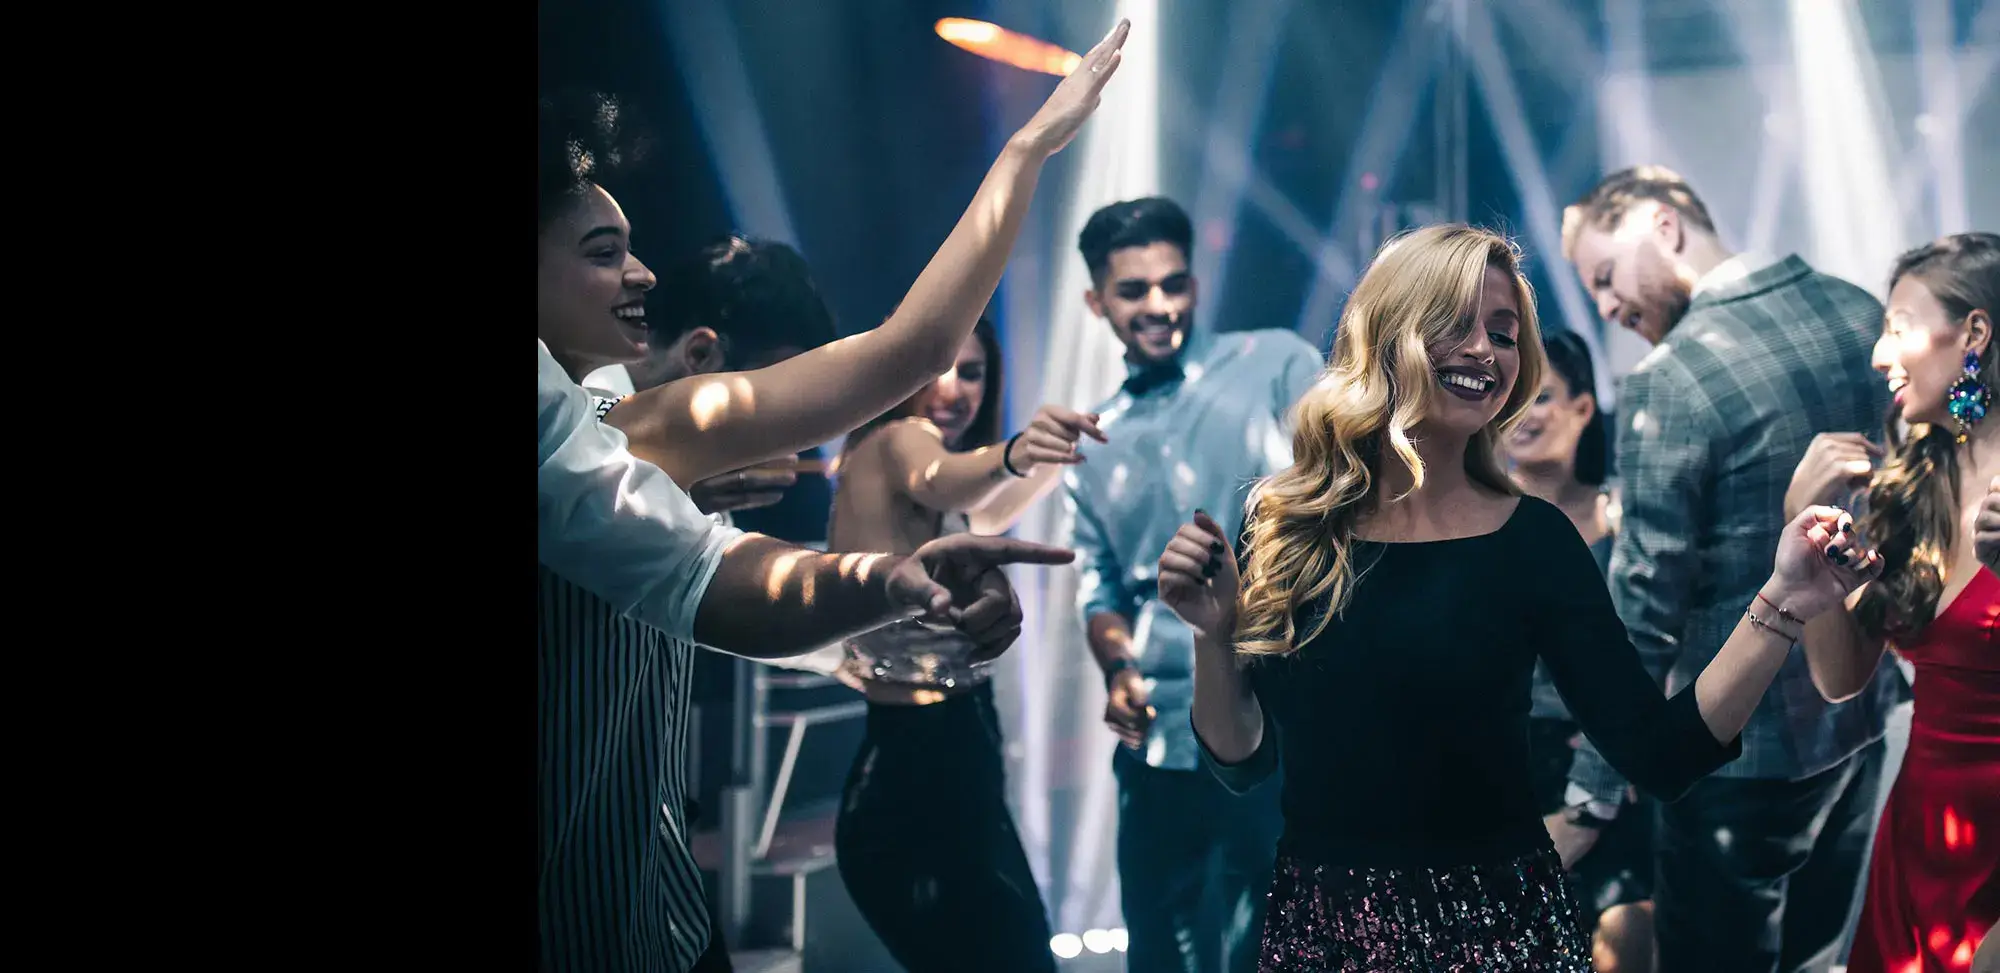 A group of people dancing at a nightclub, accompanied by energetic DJs.